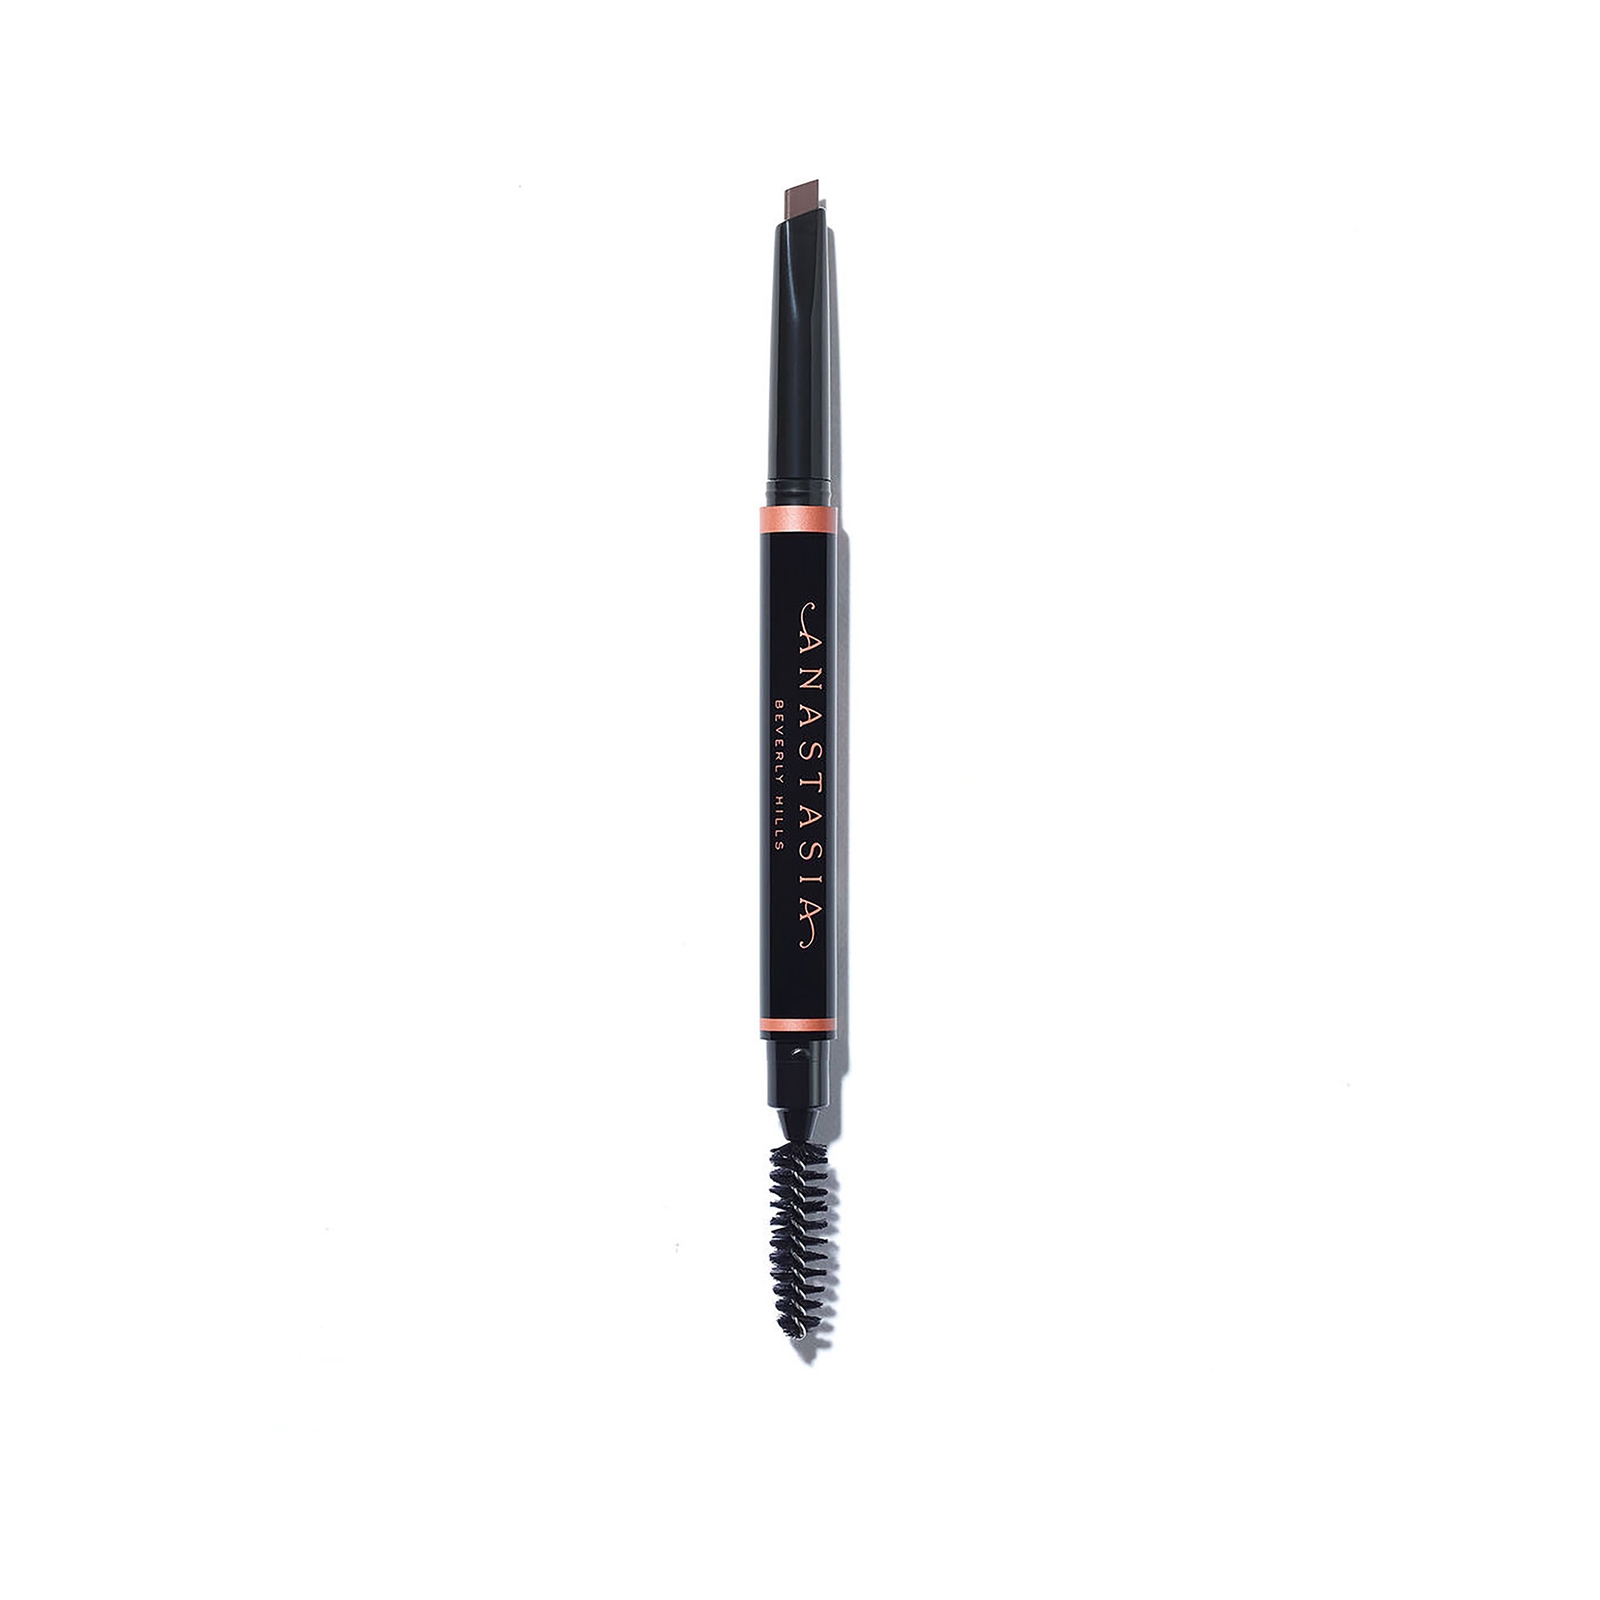 Brow Definer - 12g - Taupe